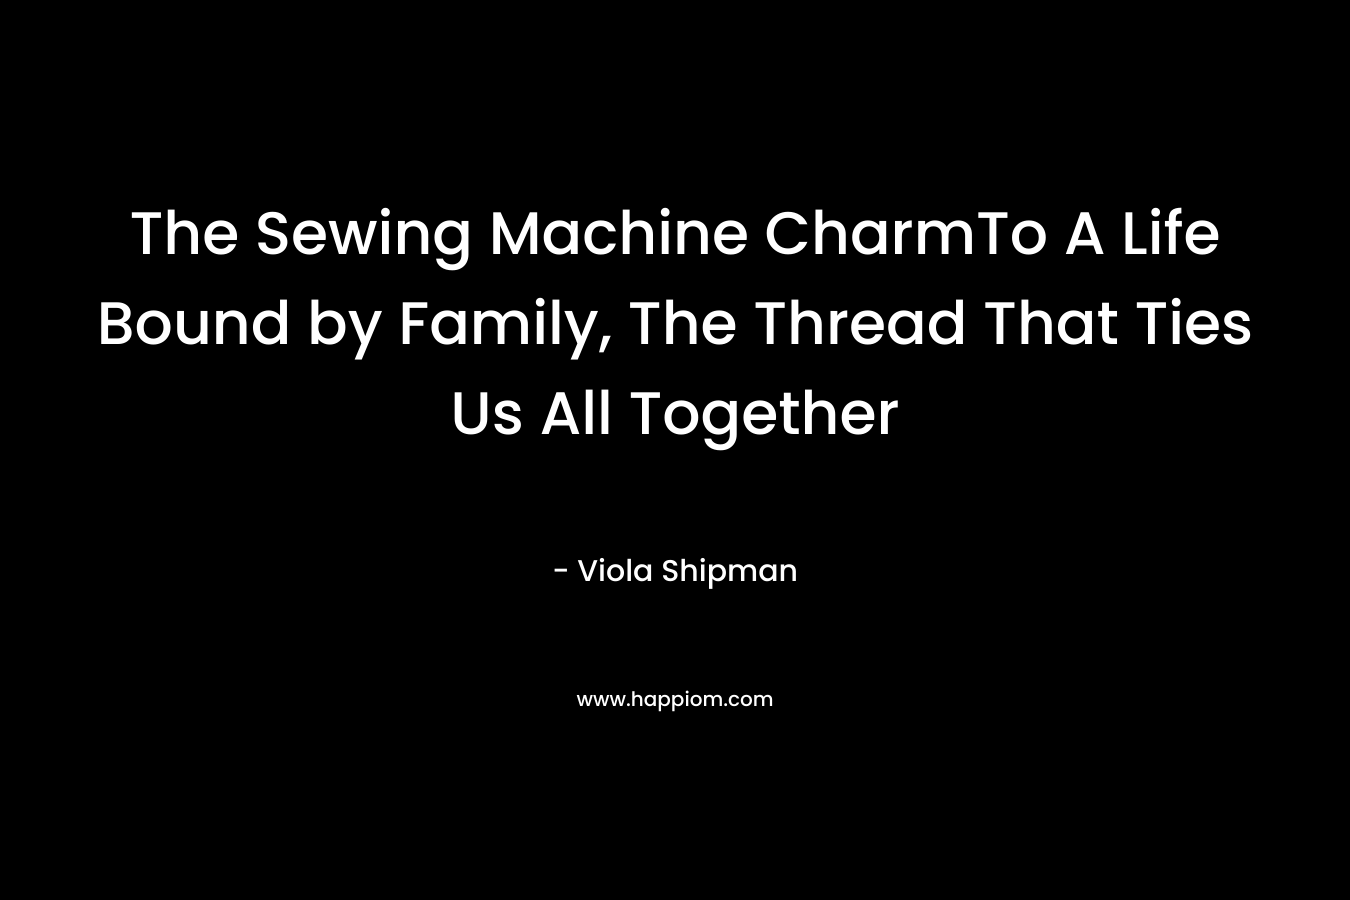 The Sewing Machine CharmTo A Life Bound by Family, The Thread That Ties Us All Together